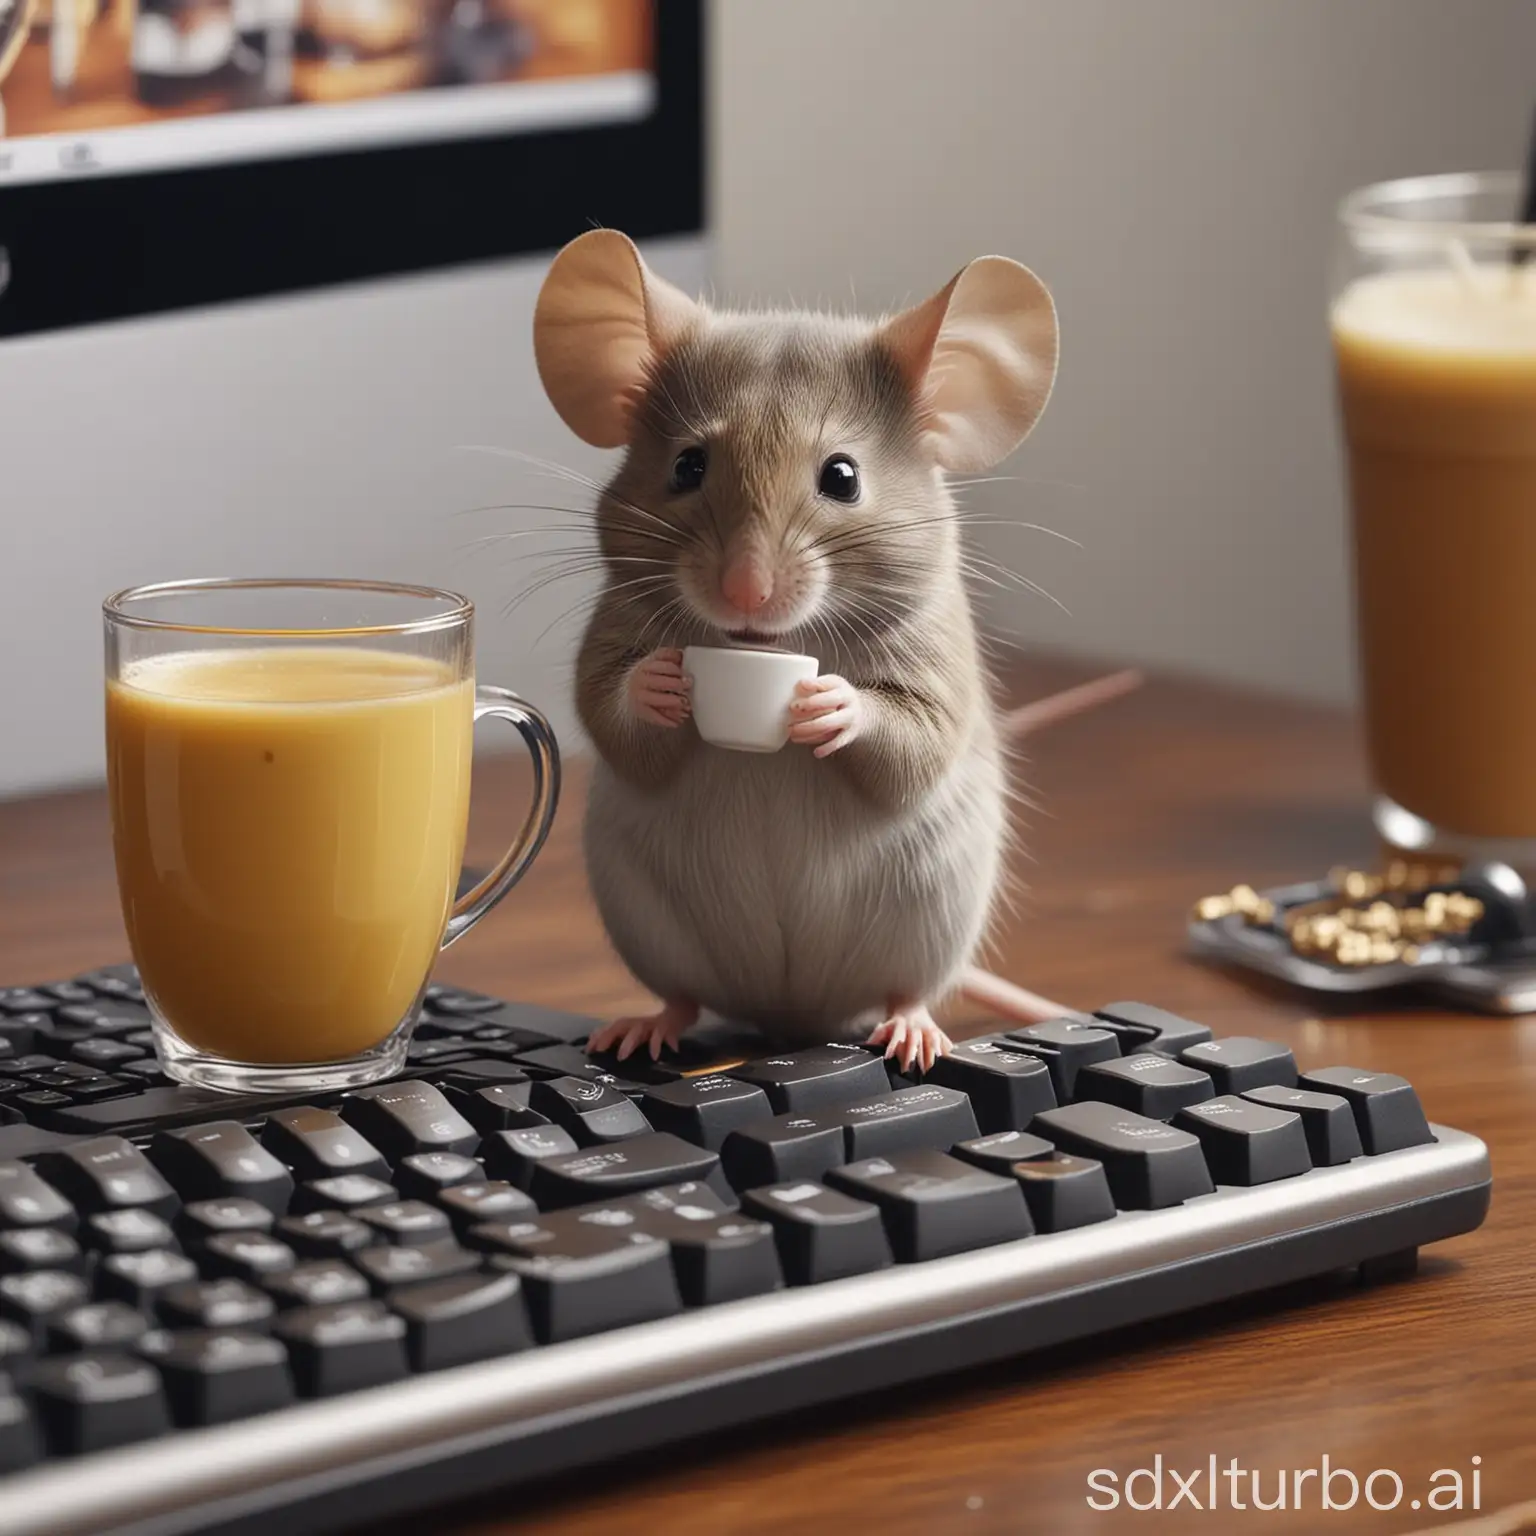 CoffeeSipping-Mouse-Typing-on-a-Keyboard-in-4K-Resolution